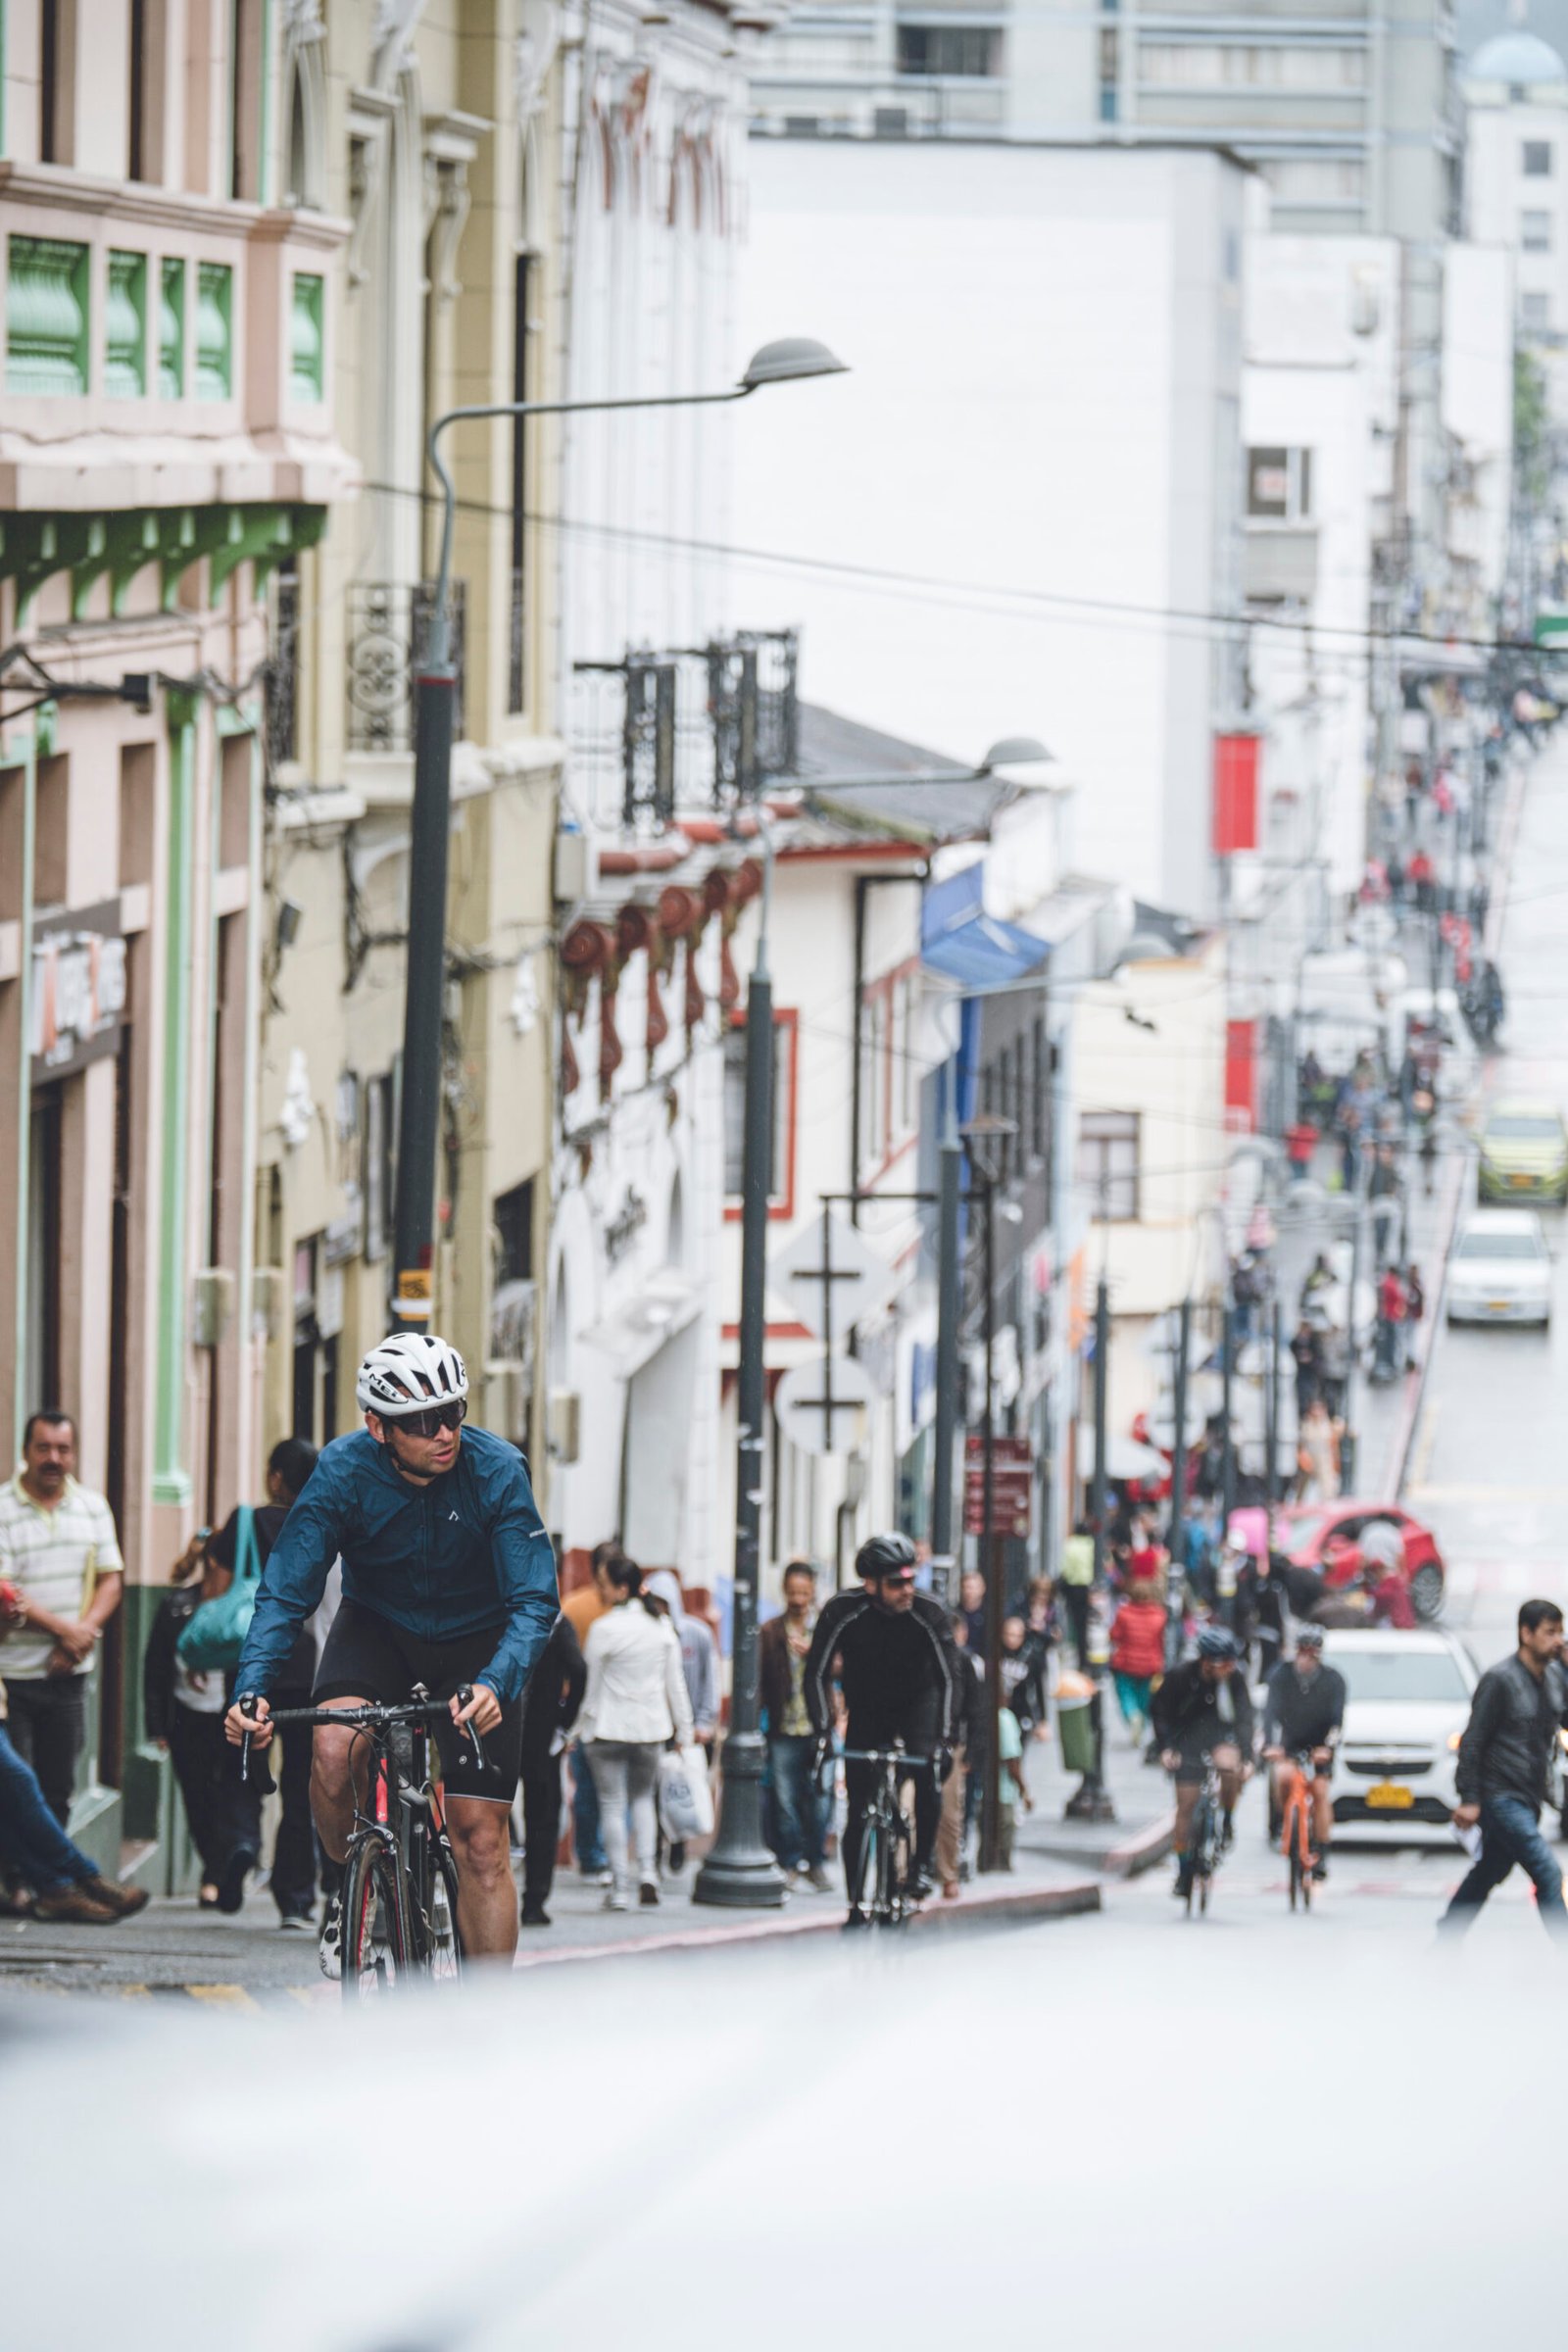 Riding your bike in the cities of Colombia is an experience